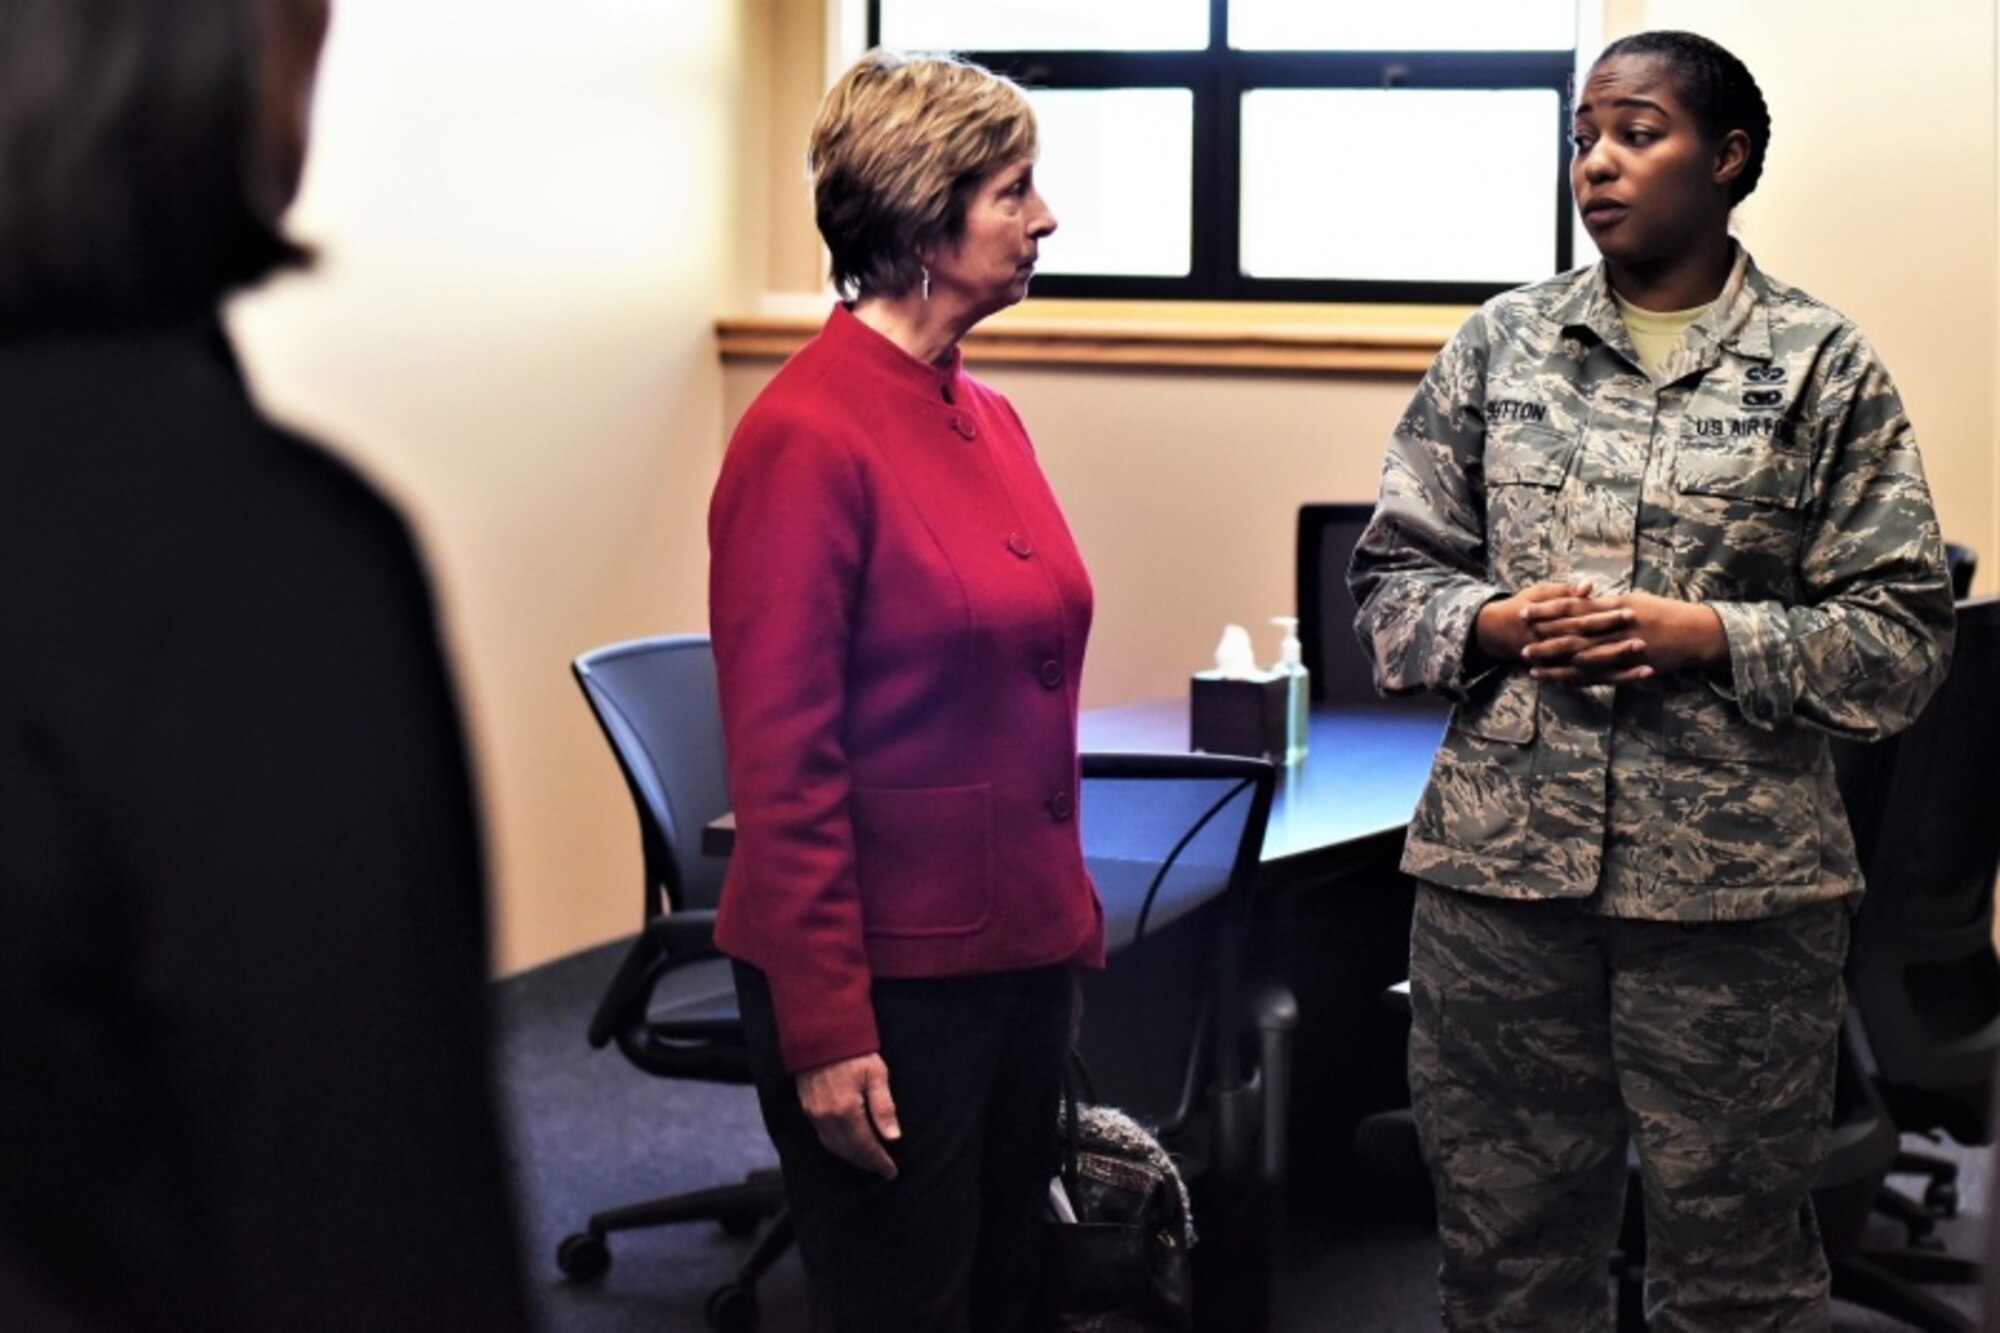 Laura Hyten speaks with former U.S. Air Force Staff Sgt. Jasmine Sutton, 341st Missile Wing special victims counsel paralegal, at the Malmstrom Air Force Base resiliency center in Montana, Jan. 17, 2018. Mrs. Hyten is married to U.S. Air Force Gen. John Hyten (not pictured), commander of U.S. Strategic Command (USSTRATCOM). While there, Gen. and Mrs. Hyten met with base leaders and Airmen to thank them for their support to USSTRATCOM’s mission.  (U.S. Air Force photo by Kiersten McCutchan)